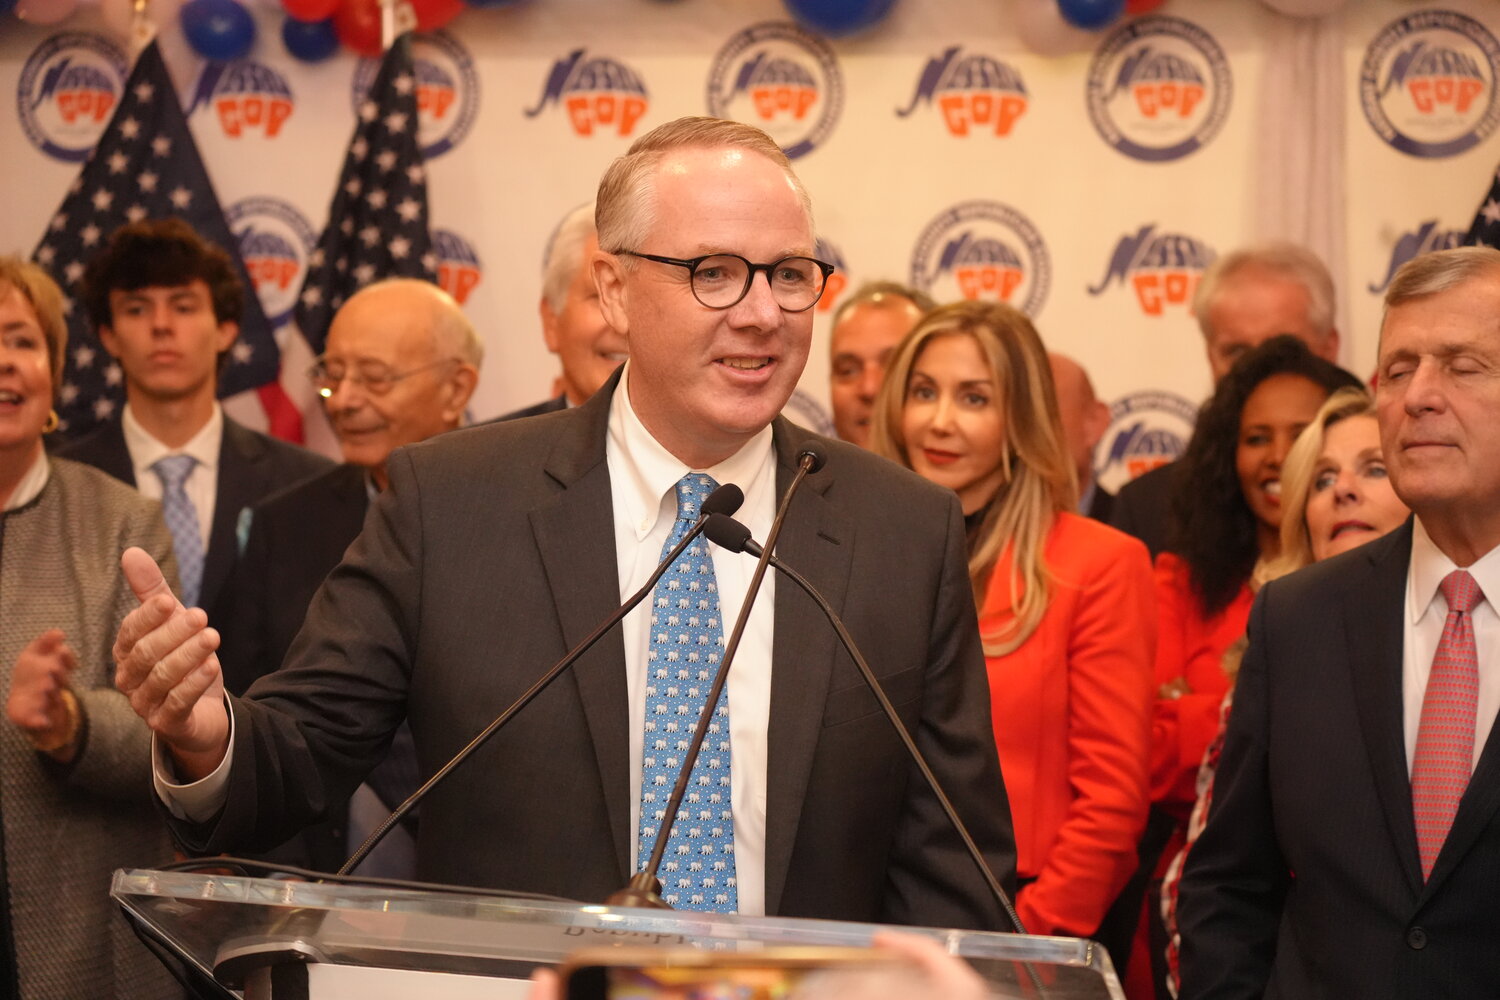 Hempstead Town Supervisor, Don Clavin, who was re-elected Tuesday offically beating Uniondale's own, Olena Nicks.